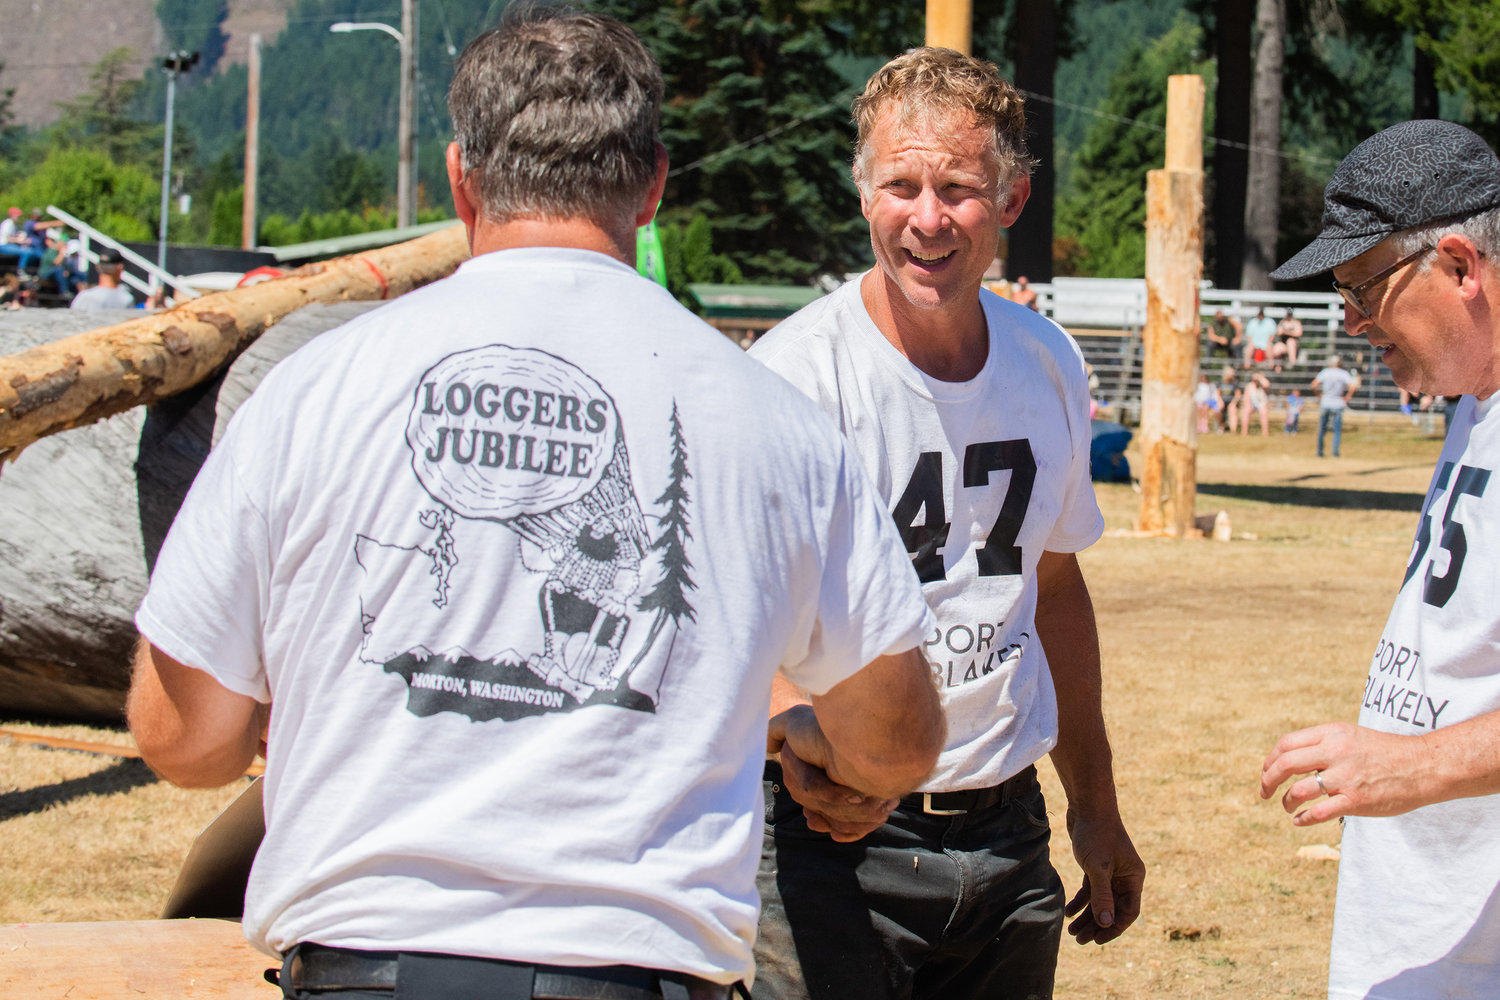 Jeff Skirvin shakes hands with his partner after competing in the double buck event Sunday afternoon inside the Morton Loggers’ Jubilee Arena.